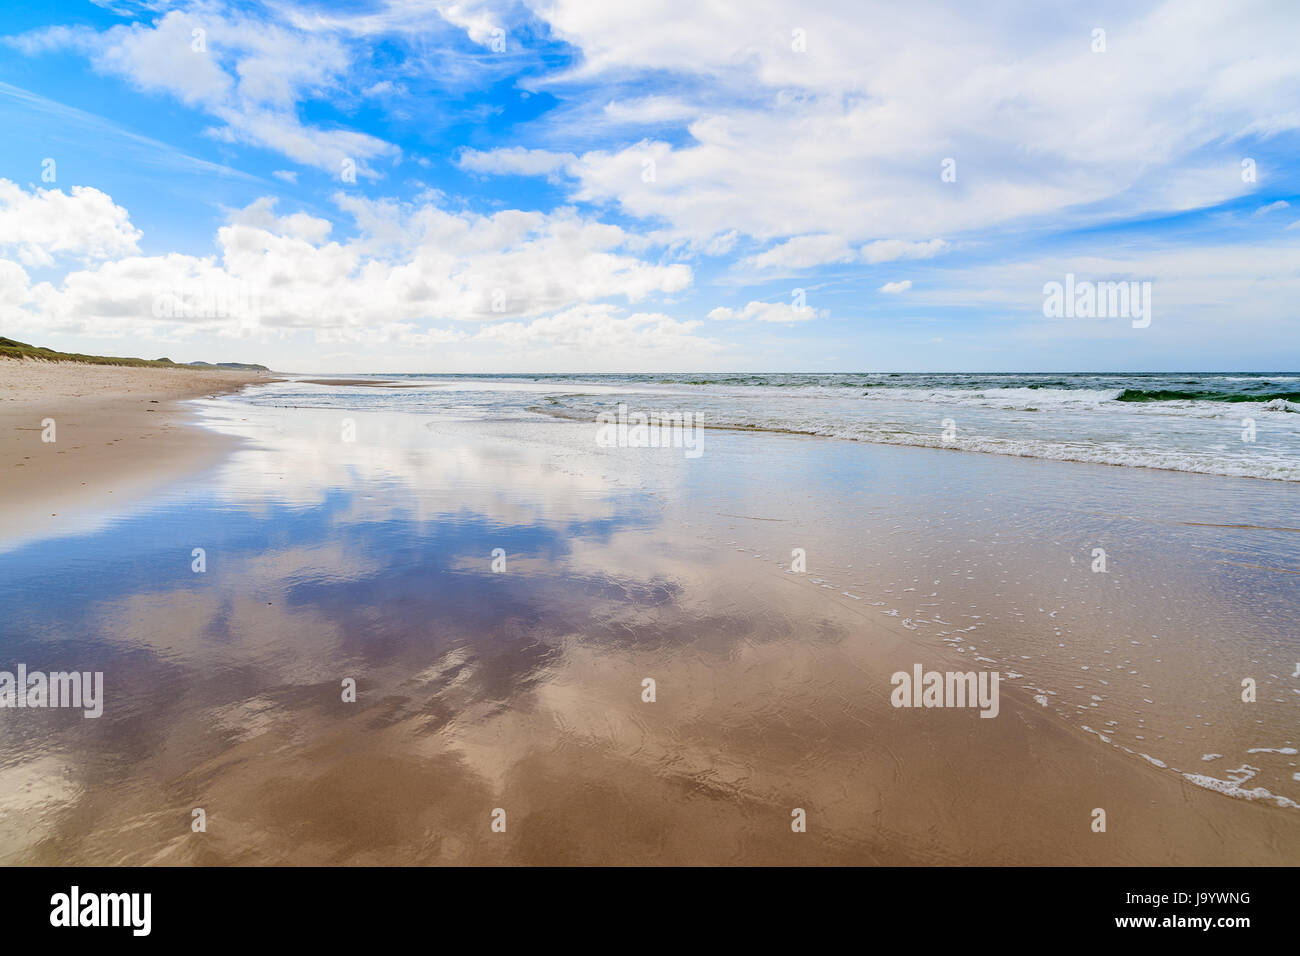 Wet sand and clouds reflections on List beach, Sylt island, North Sea, Germany Stock Photo